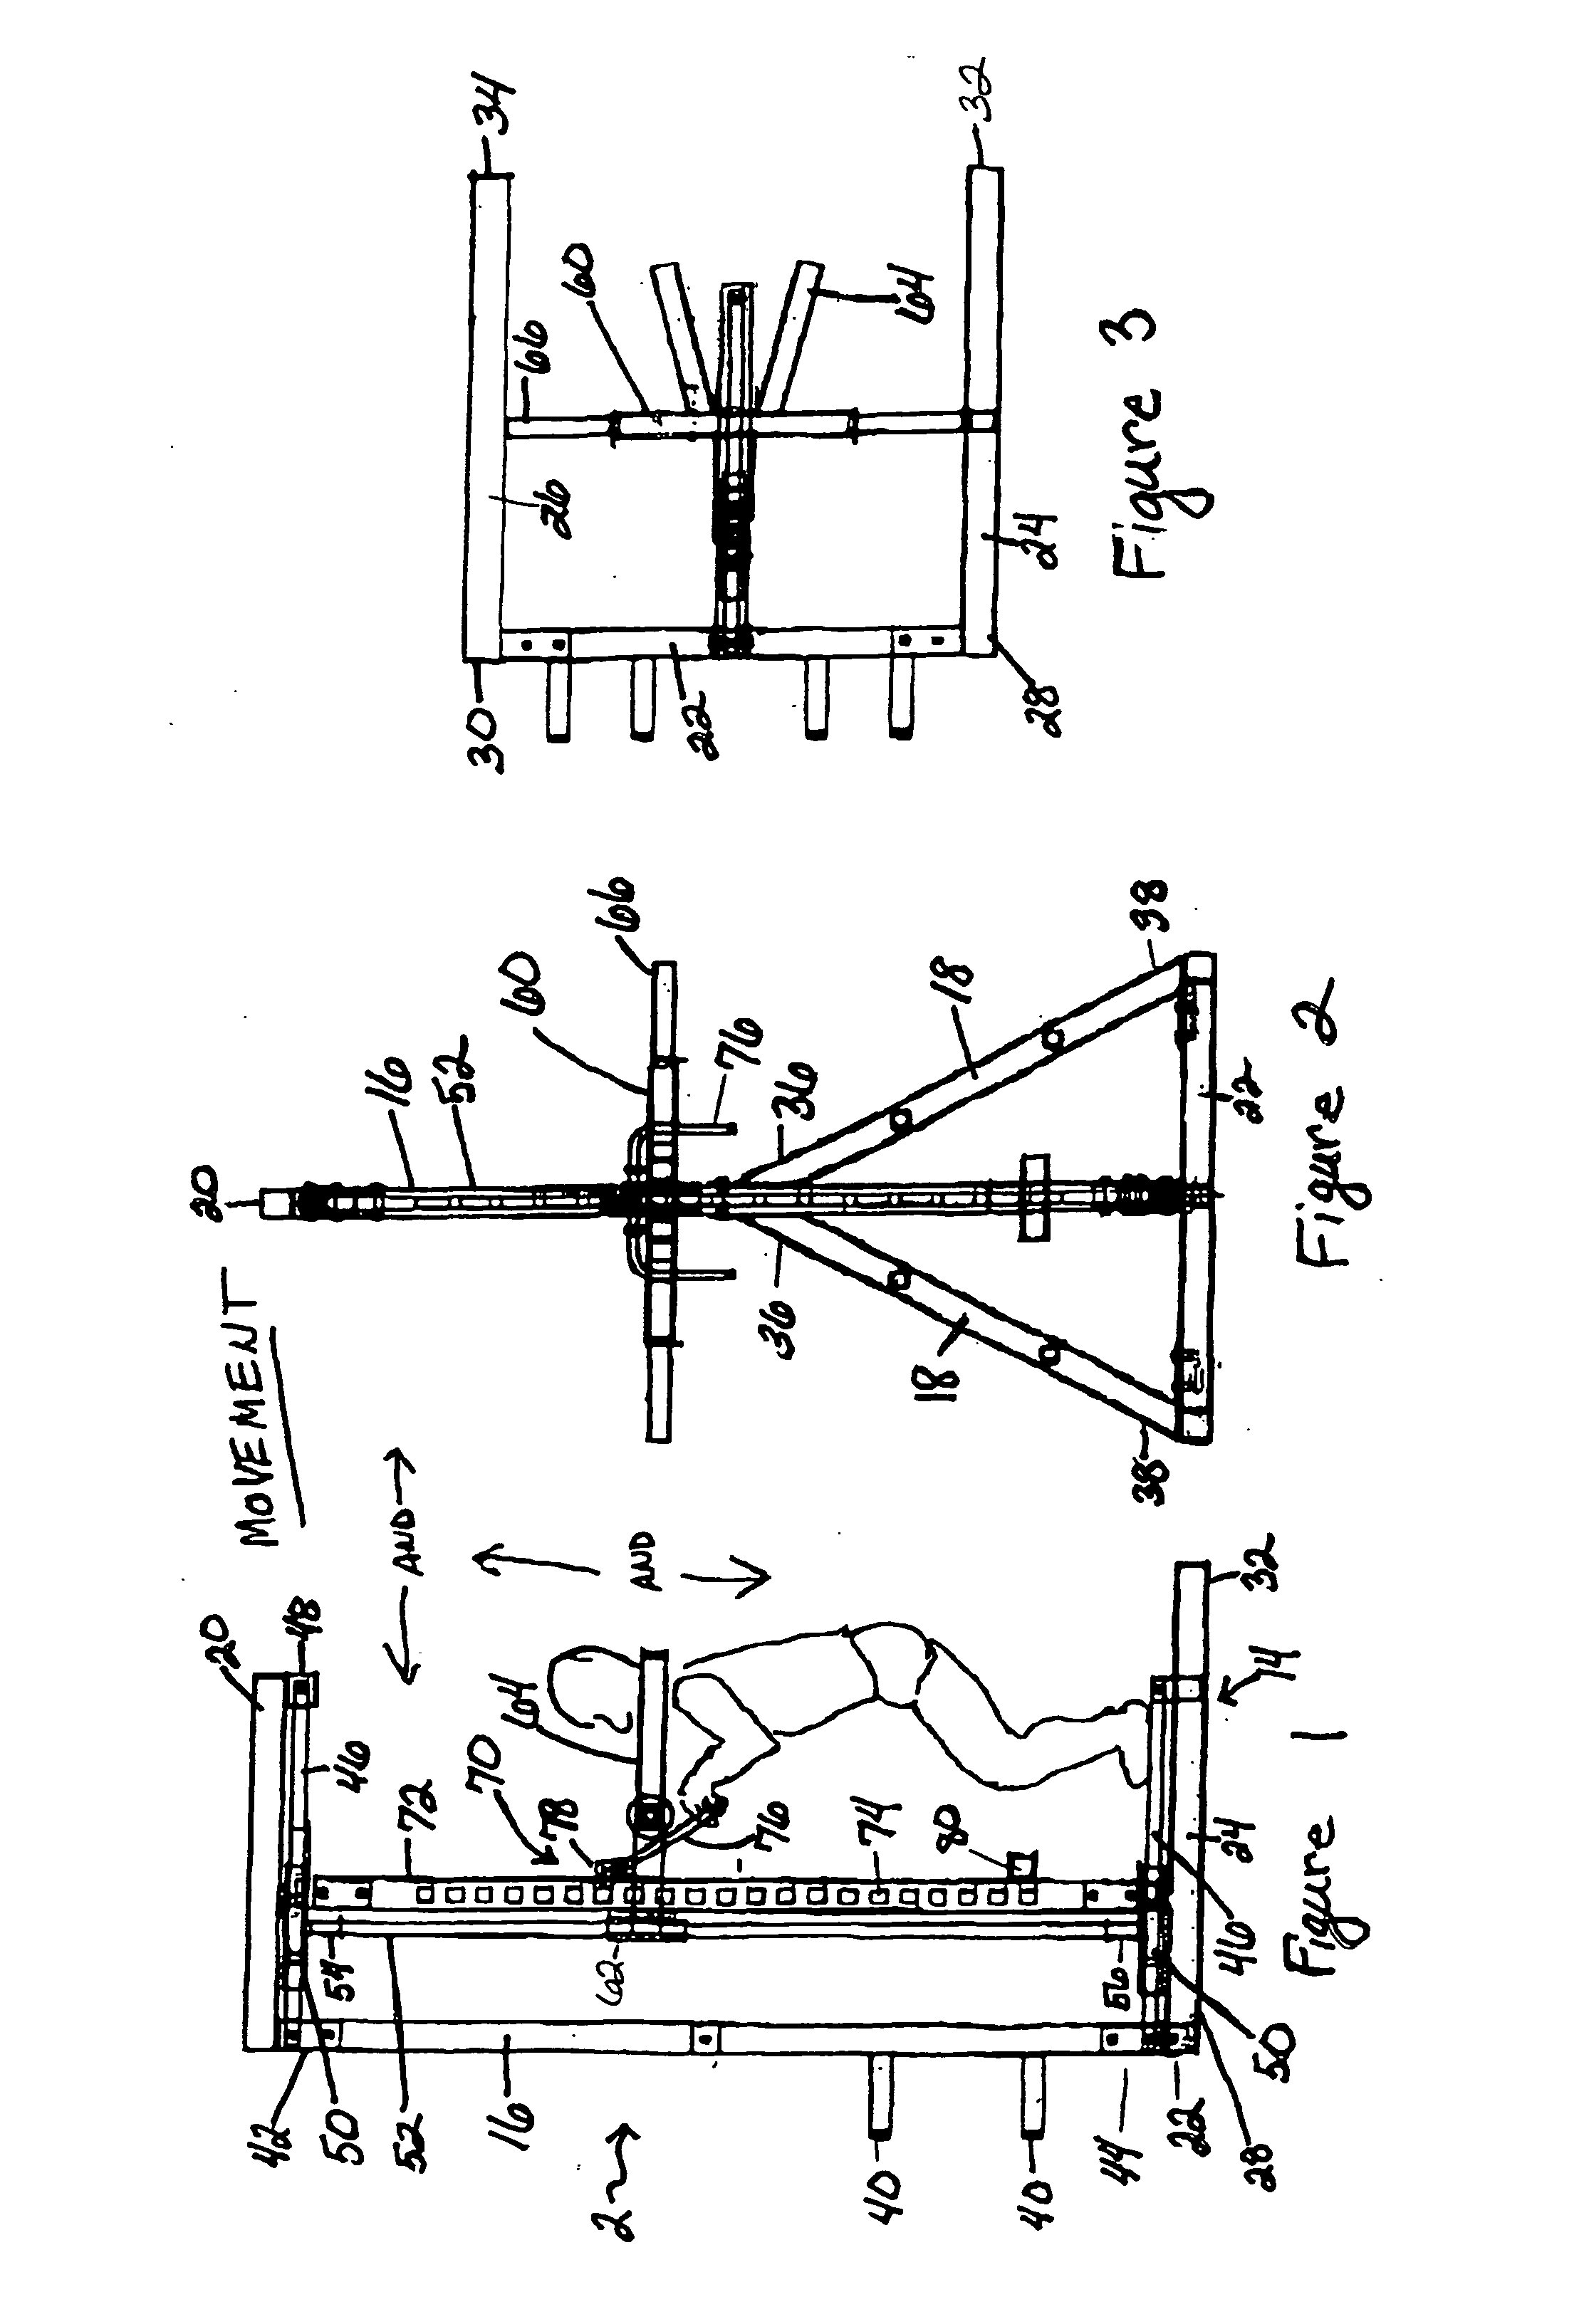 Standing weightlifting apparatus